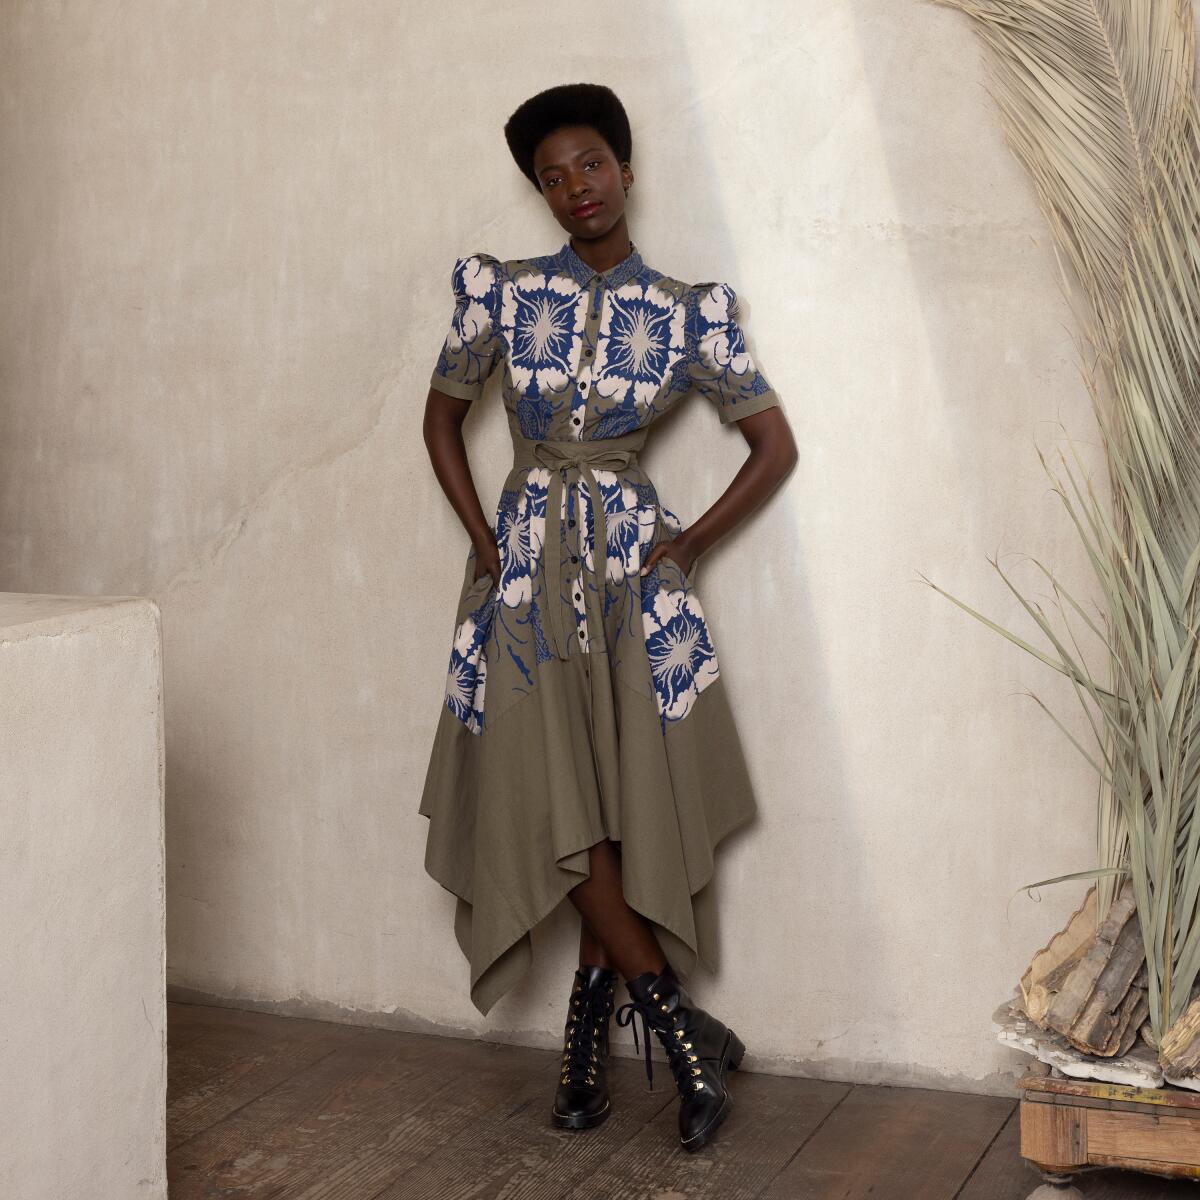 A woman modeling an olive drab dress with blue-and-white patterned panels